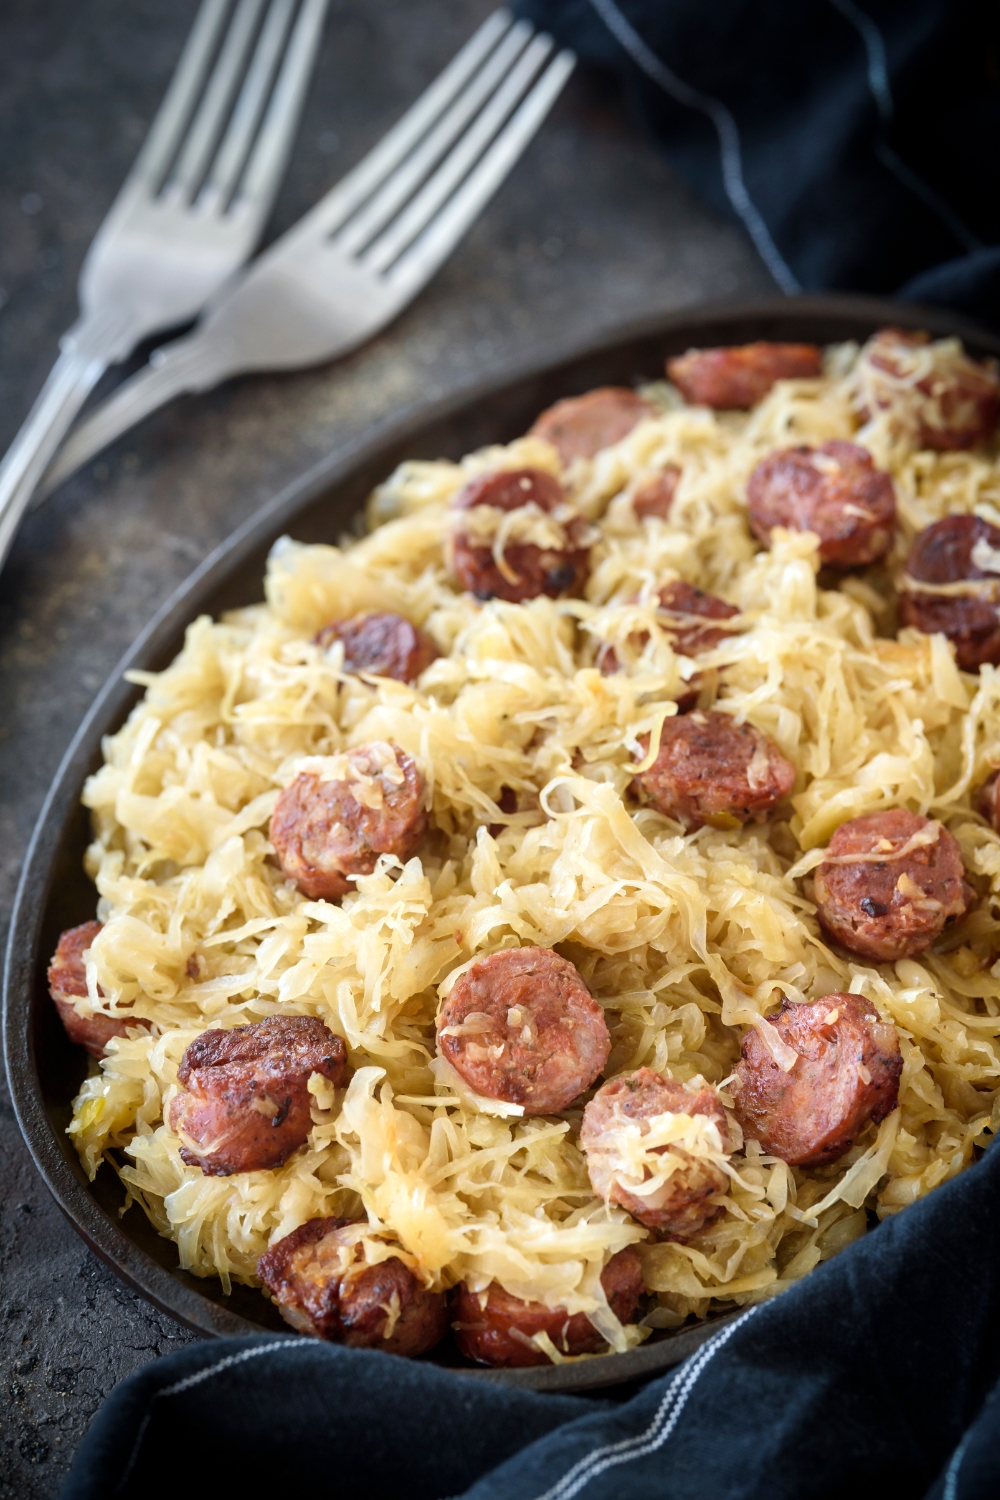 A plate filled with sauerkraut and sliced sausages. Two forks are next to the plate.